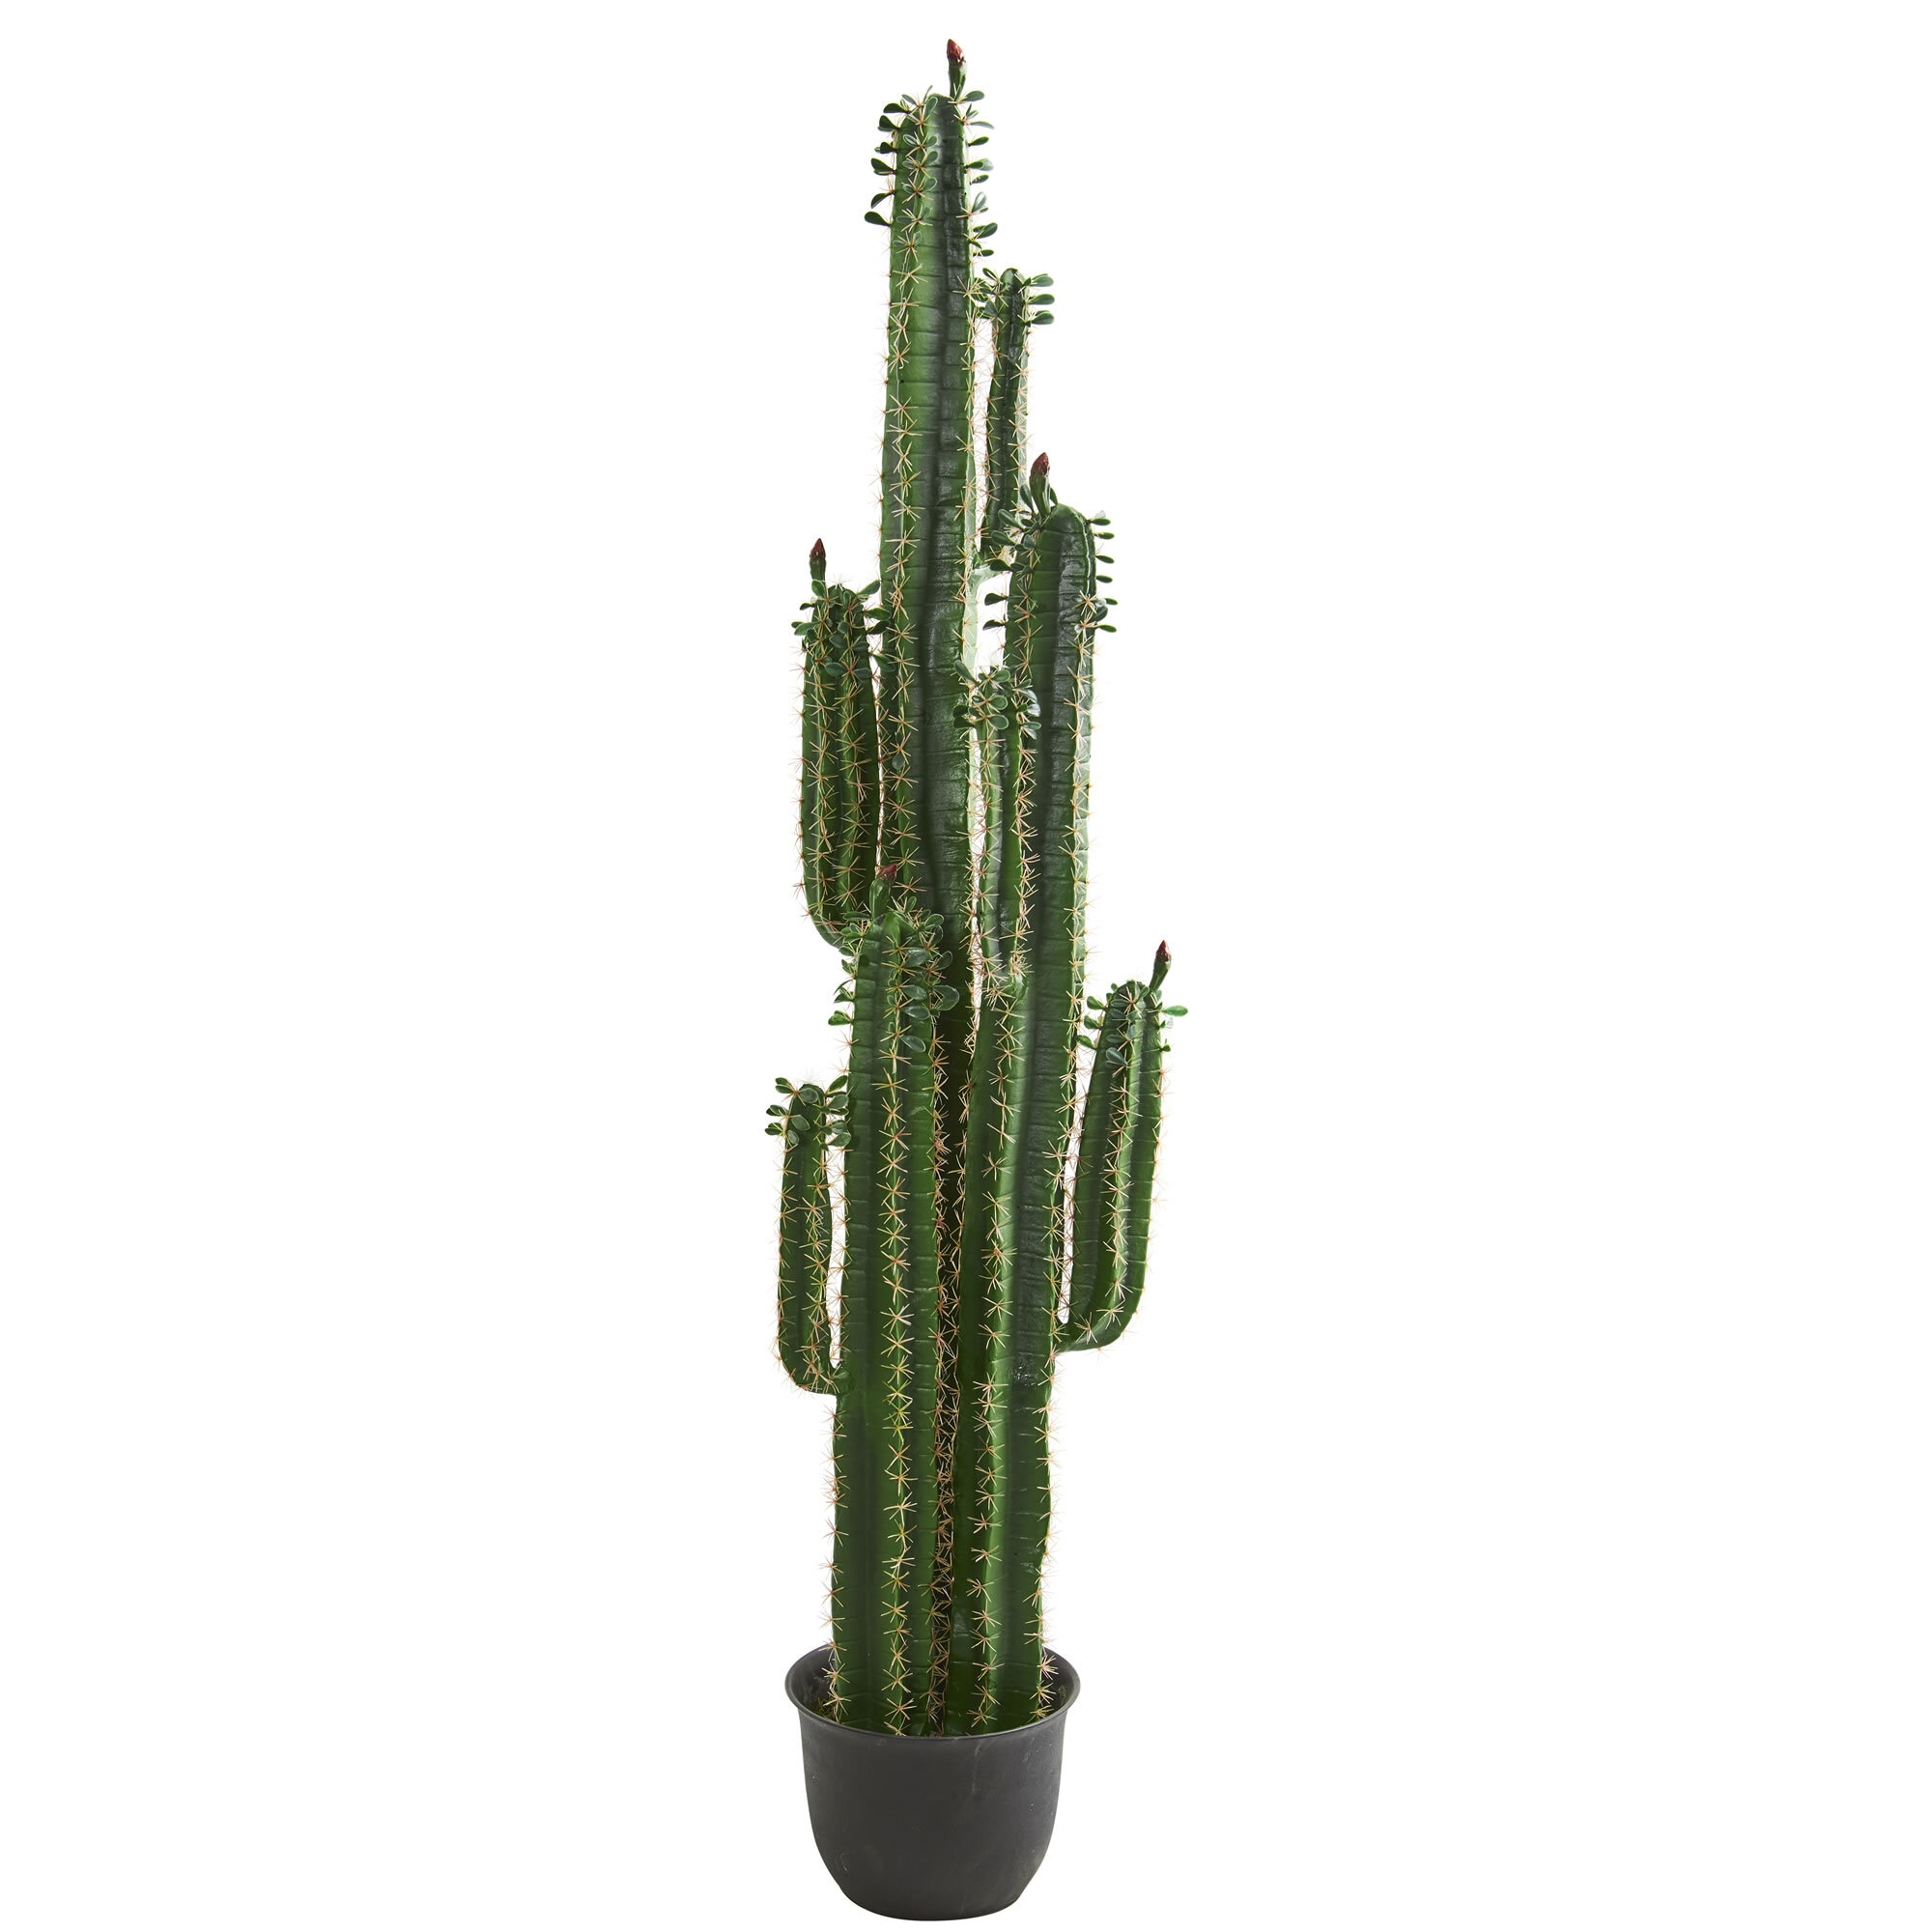 File:Life cycle of Fish hook Cactus.jpg - Wikimedia Commons